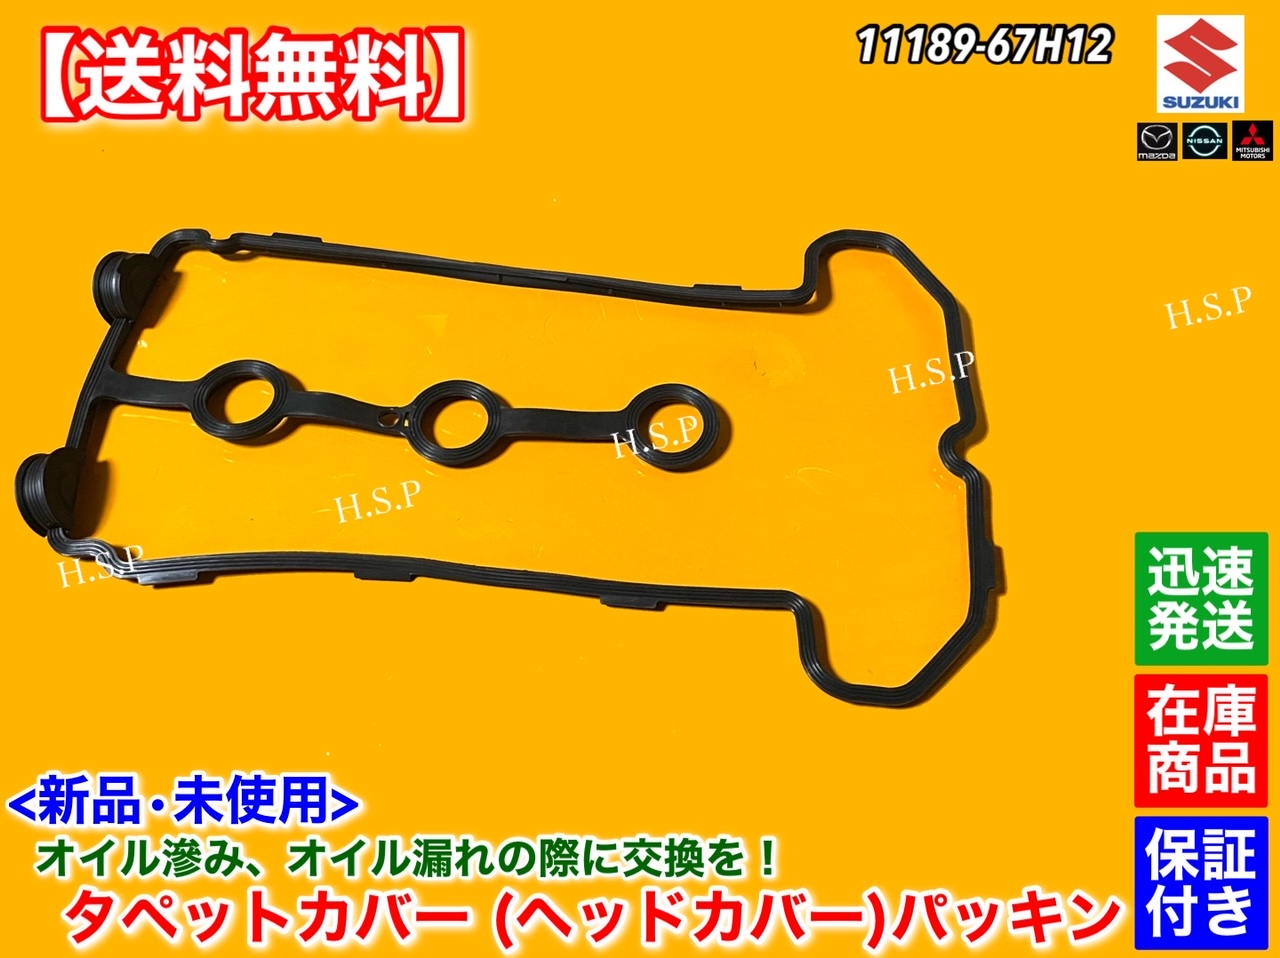  new goods K6A tappet cover gasket Wagon R MH21S MH22S MH23S 11189-67H12 11189-67H11 oil leaks blotting exchange turbo gasket head cover 